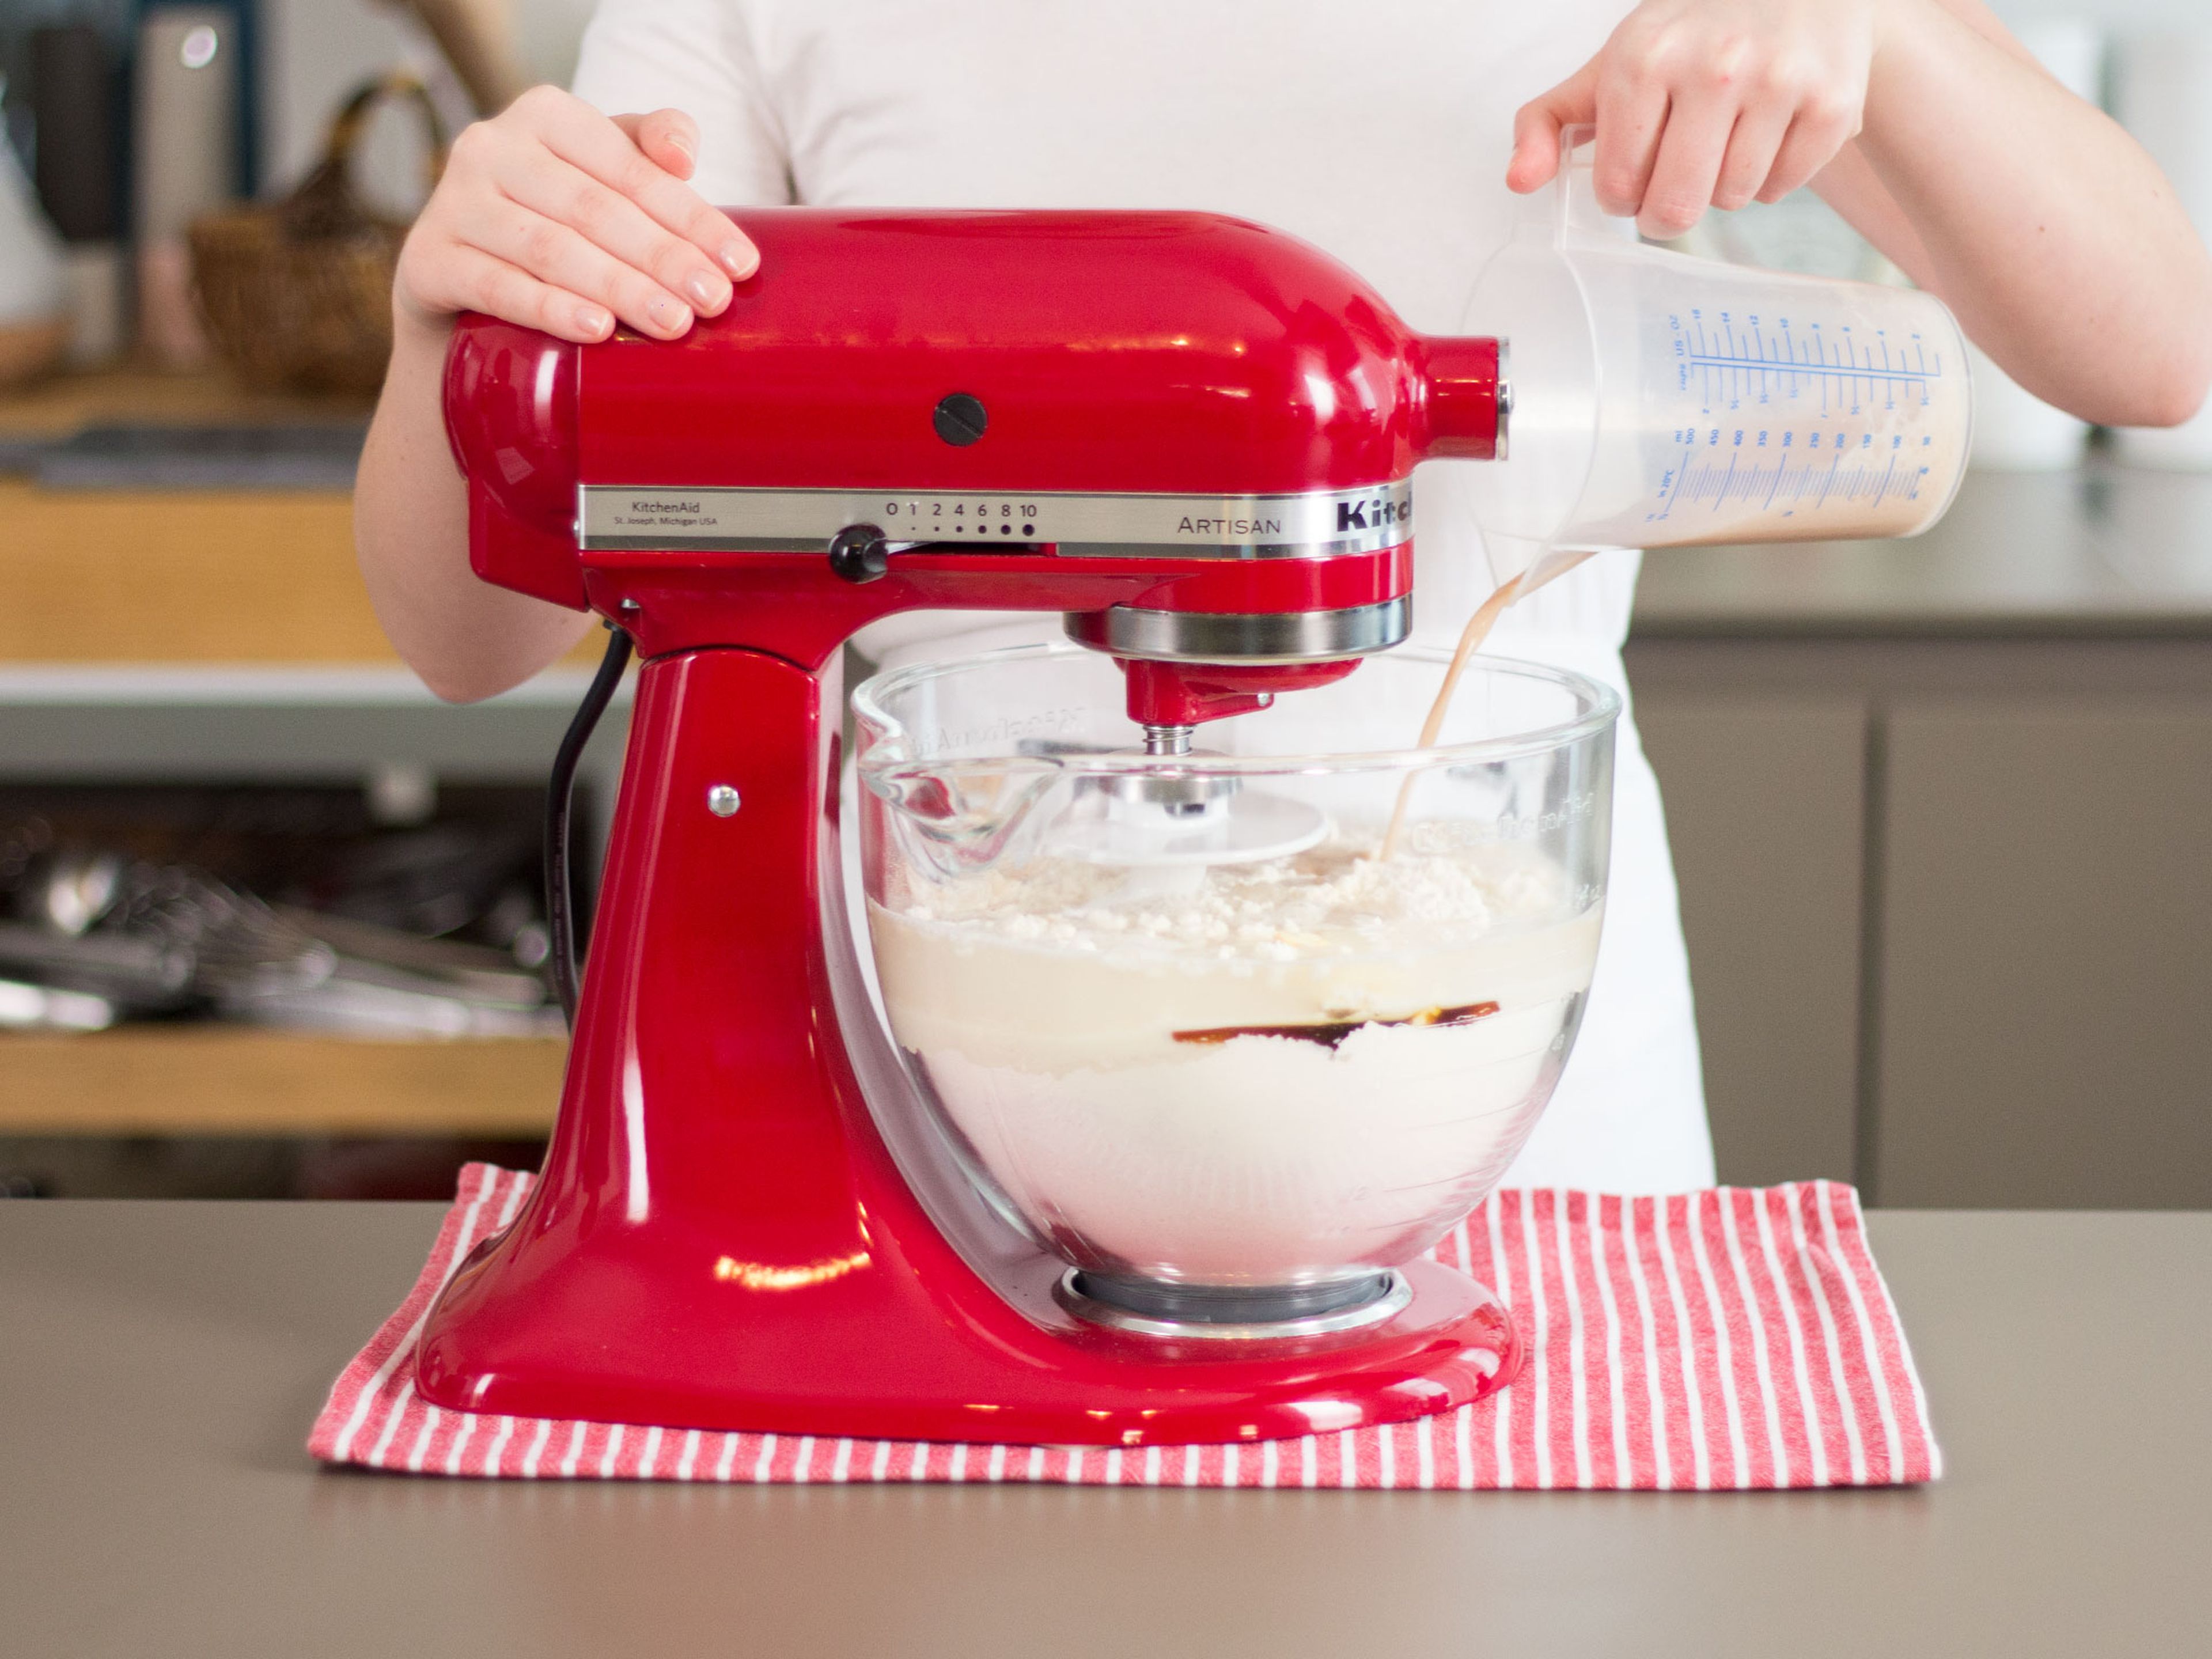 Combine the rest of the water, flour, rye flour, honey, butter, salt, and yeast mixture using a stand mixer with a dough hook. Knead for approx. 10 min. until an elastic dough forms. Cover and allow to rise in a warm place for approx. 1 h or until the dough has doubled in volume.